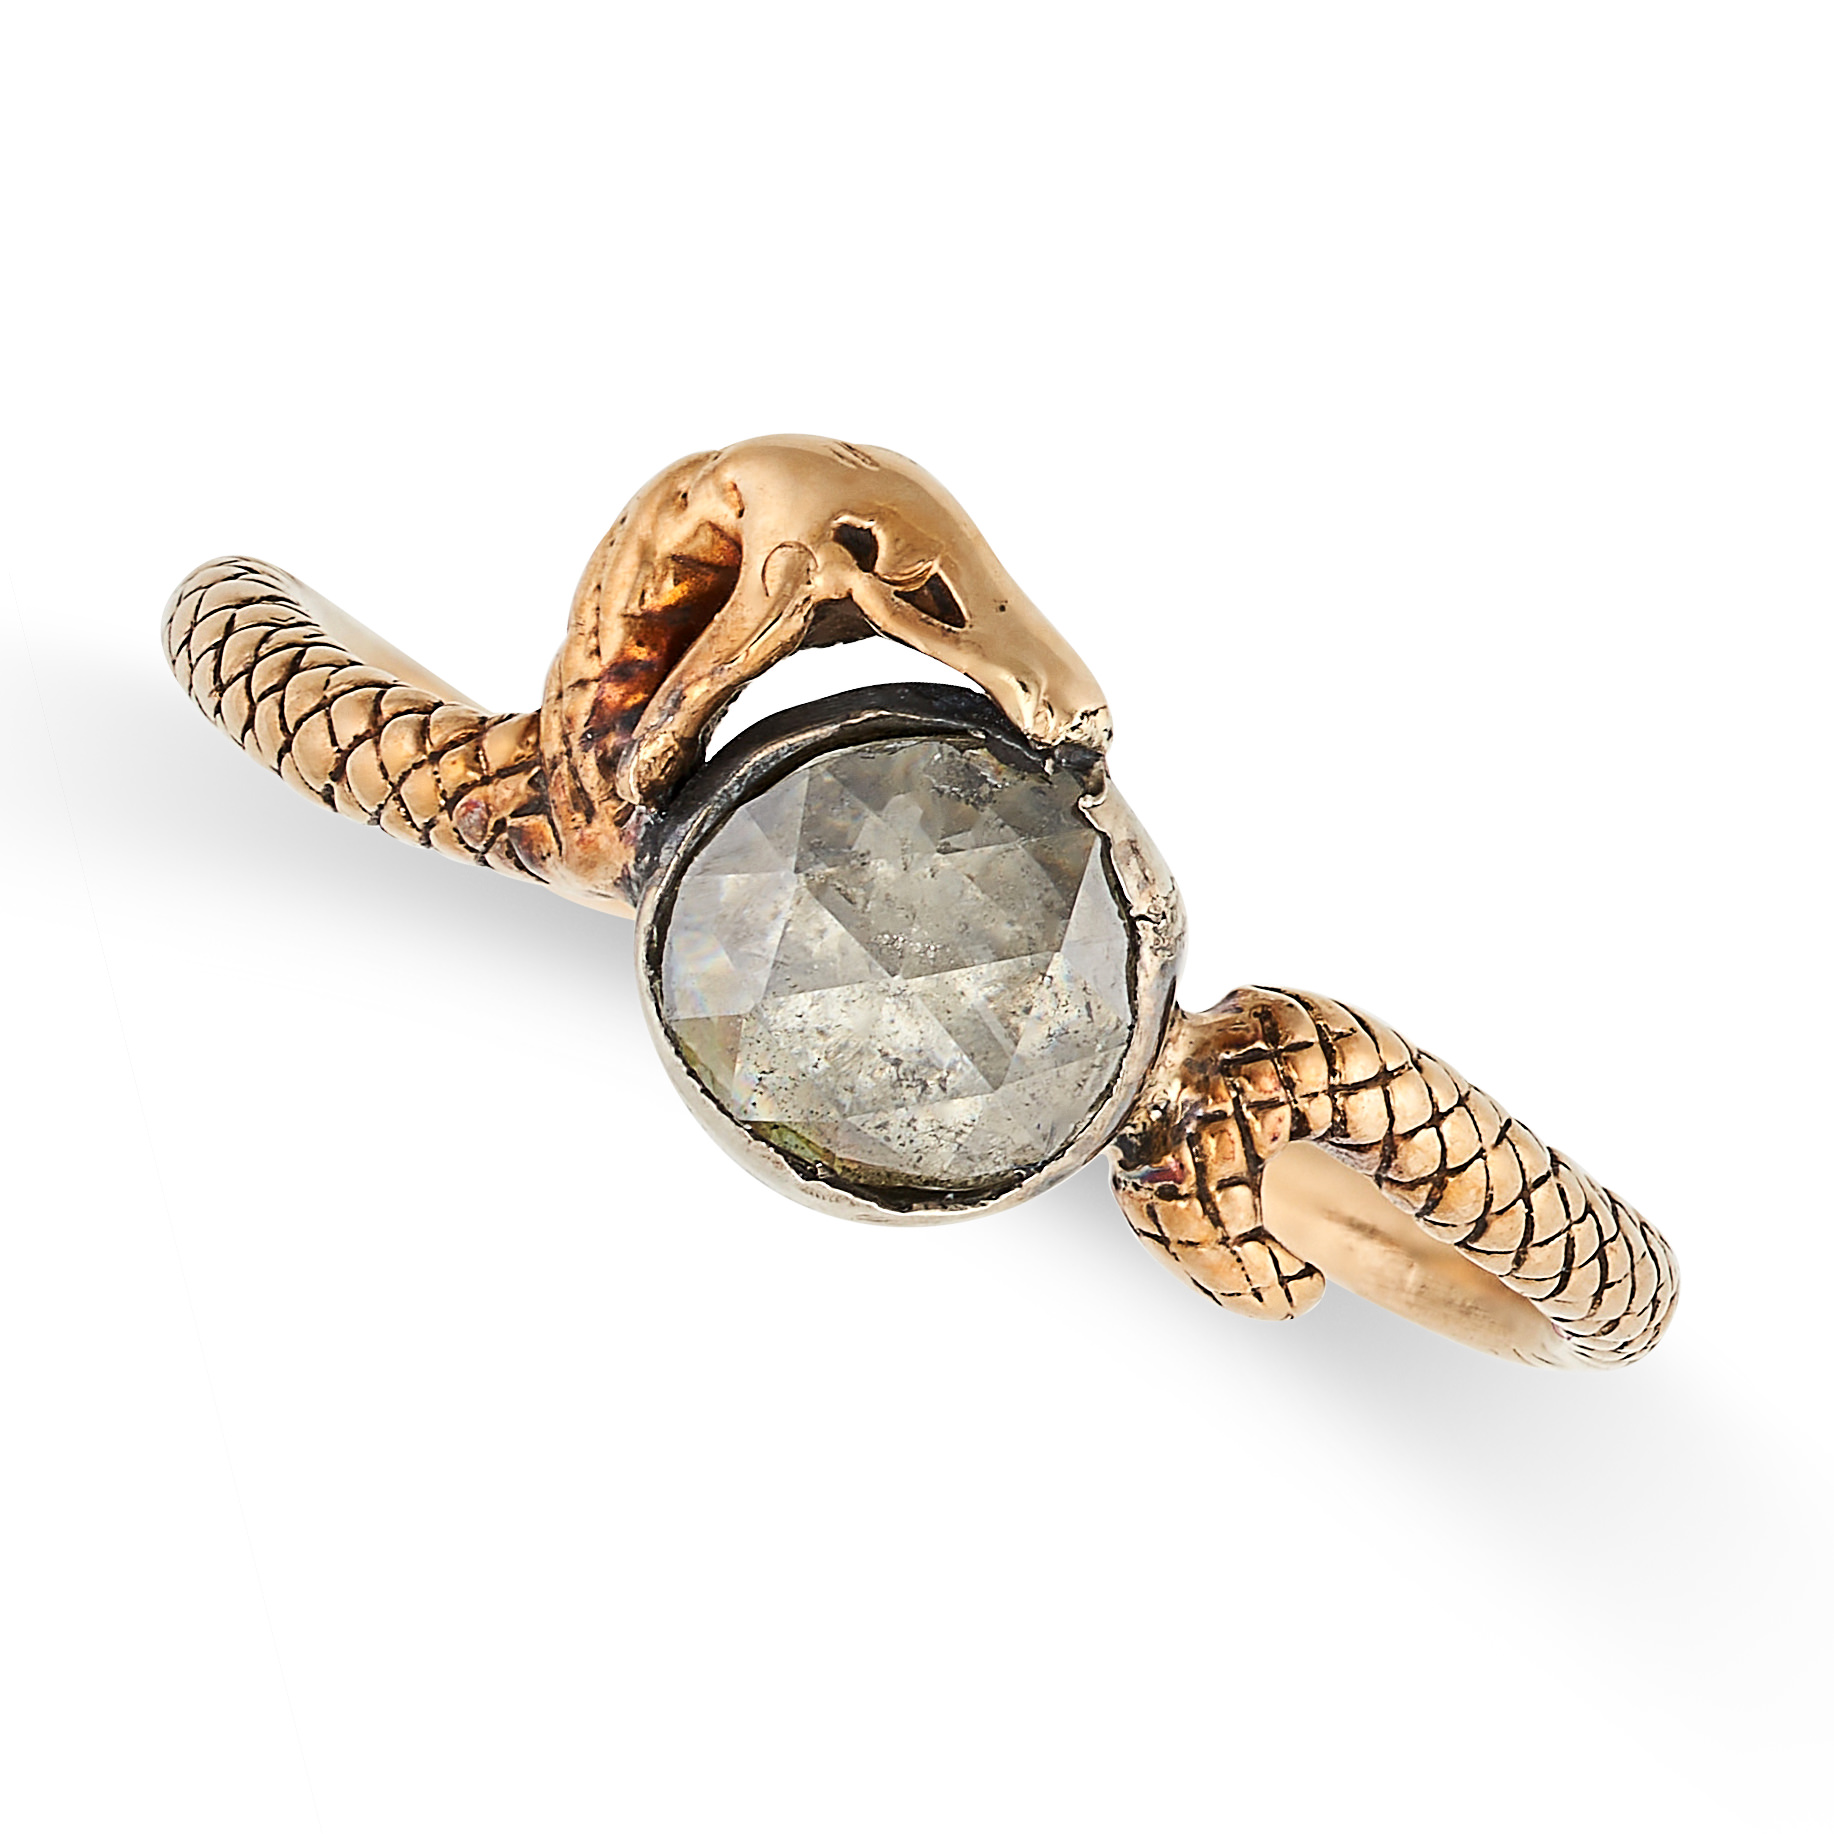 AN ANTIQUE DIAMOND SNAKE RING in yellow gold and silver, designed as a snake coiled around a rose